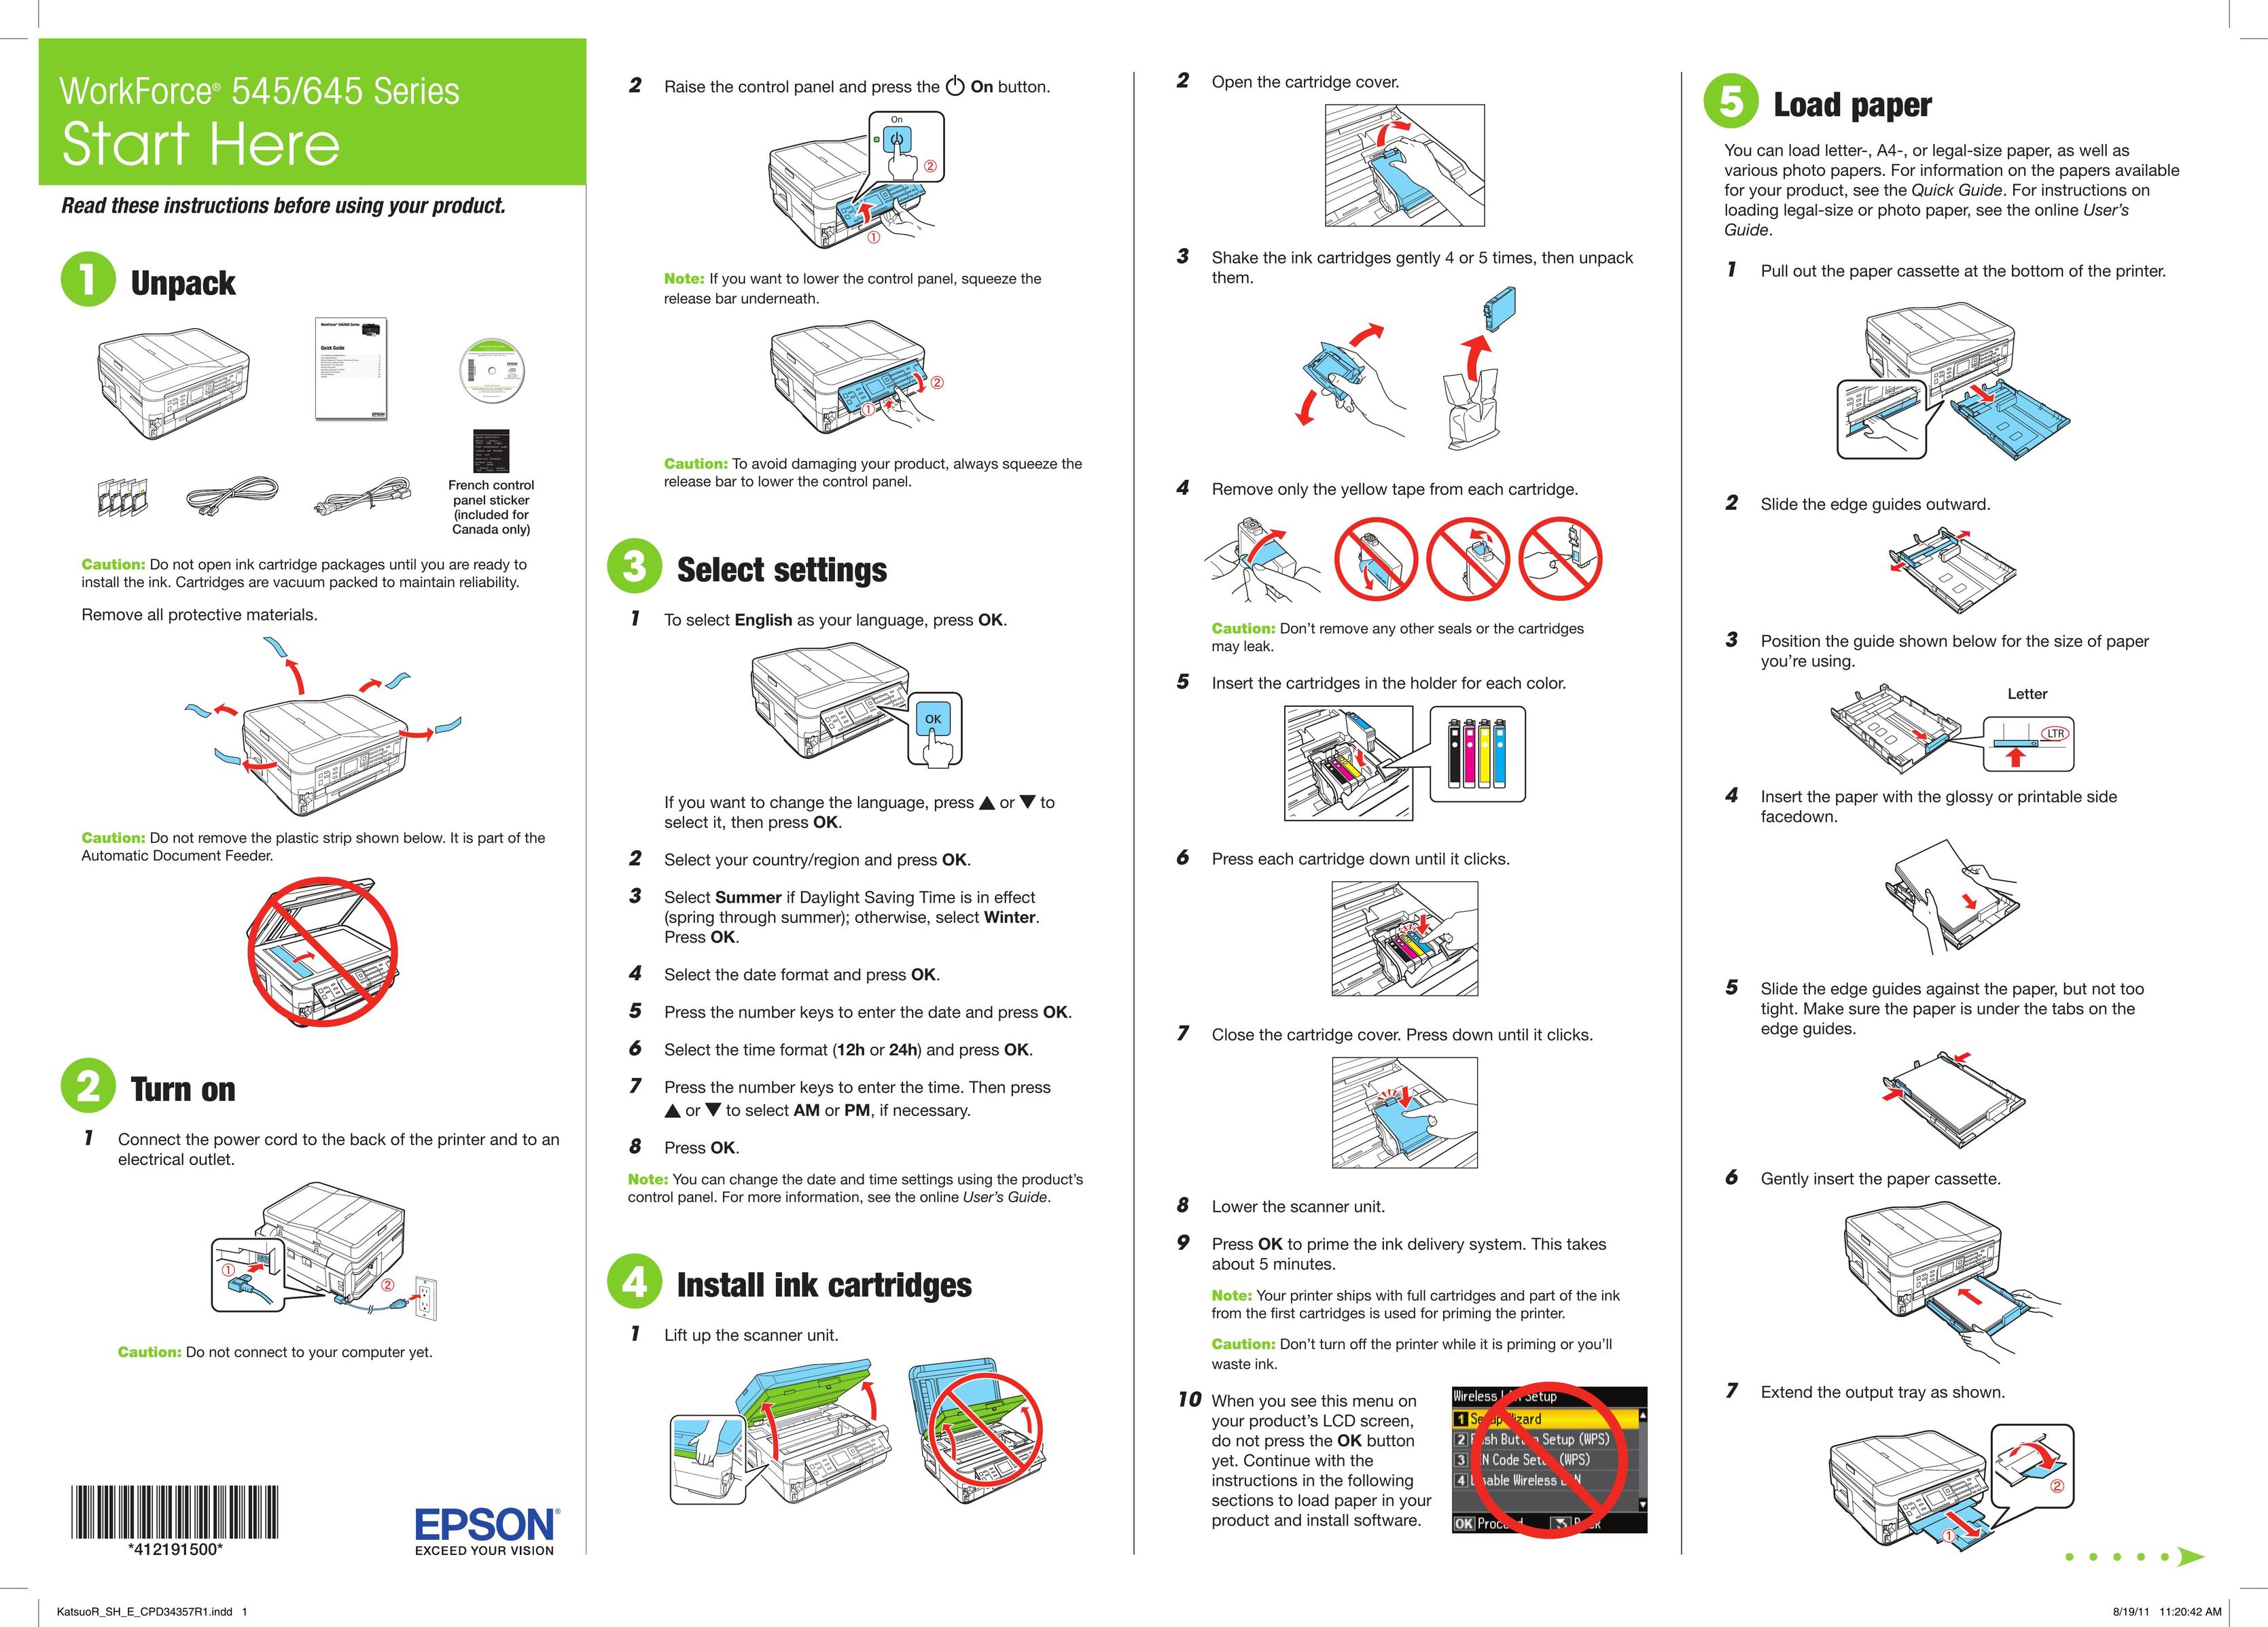 Epson 645 All in One Printer User Manual